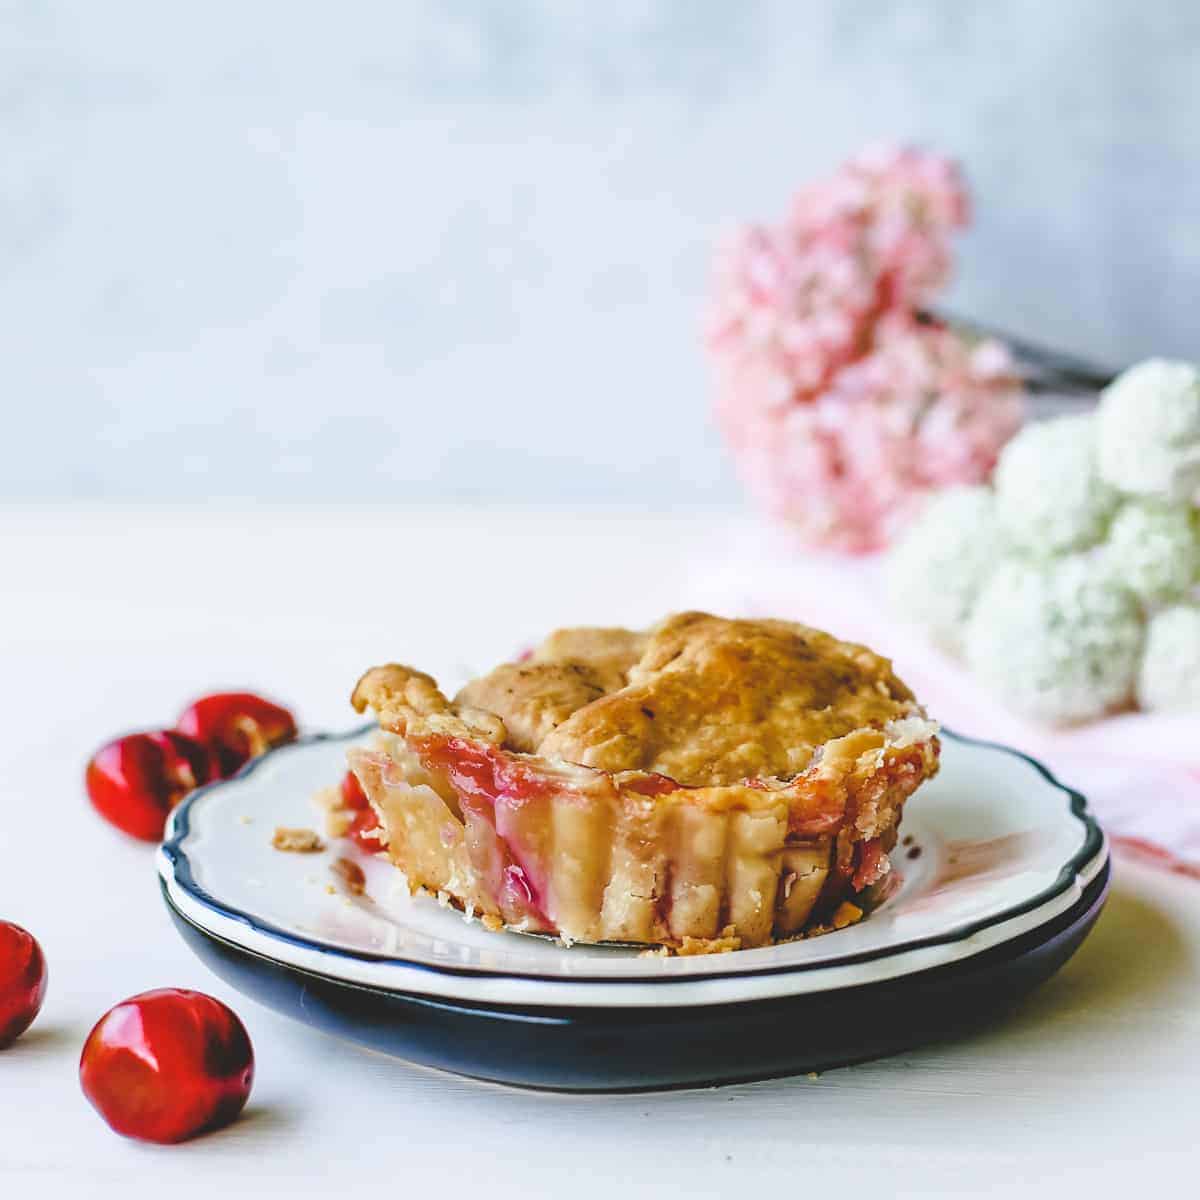 Mini cherry pie on plate with fresh cherries scattered on table."